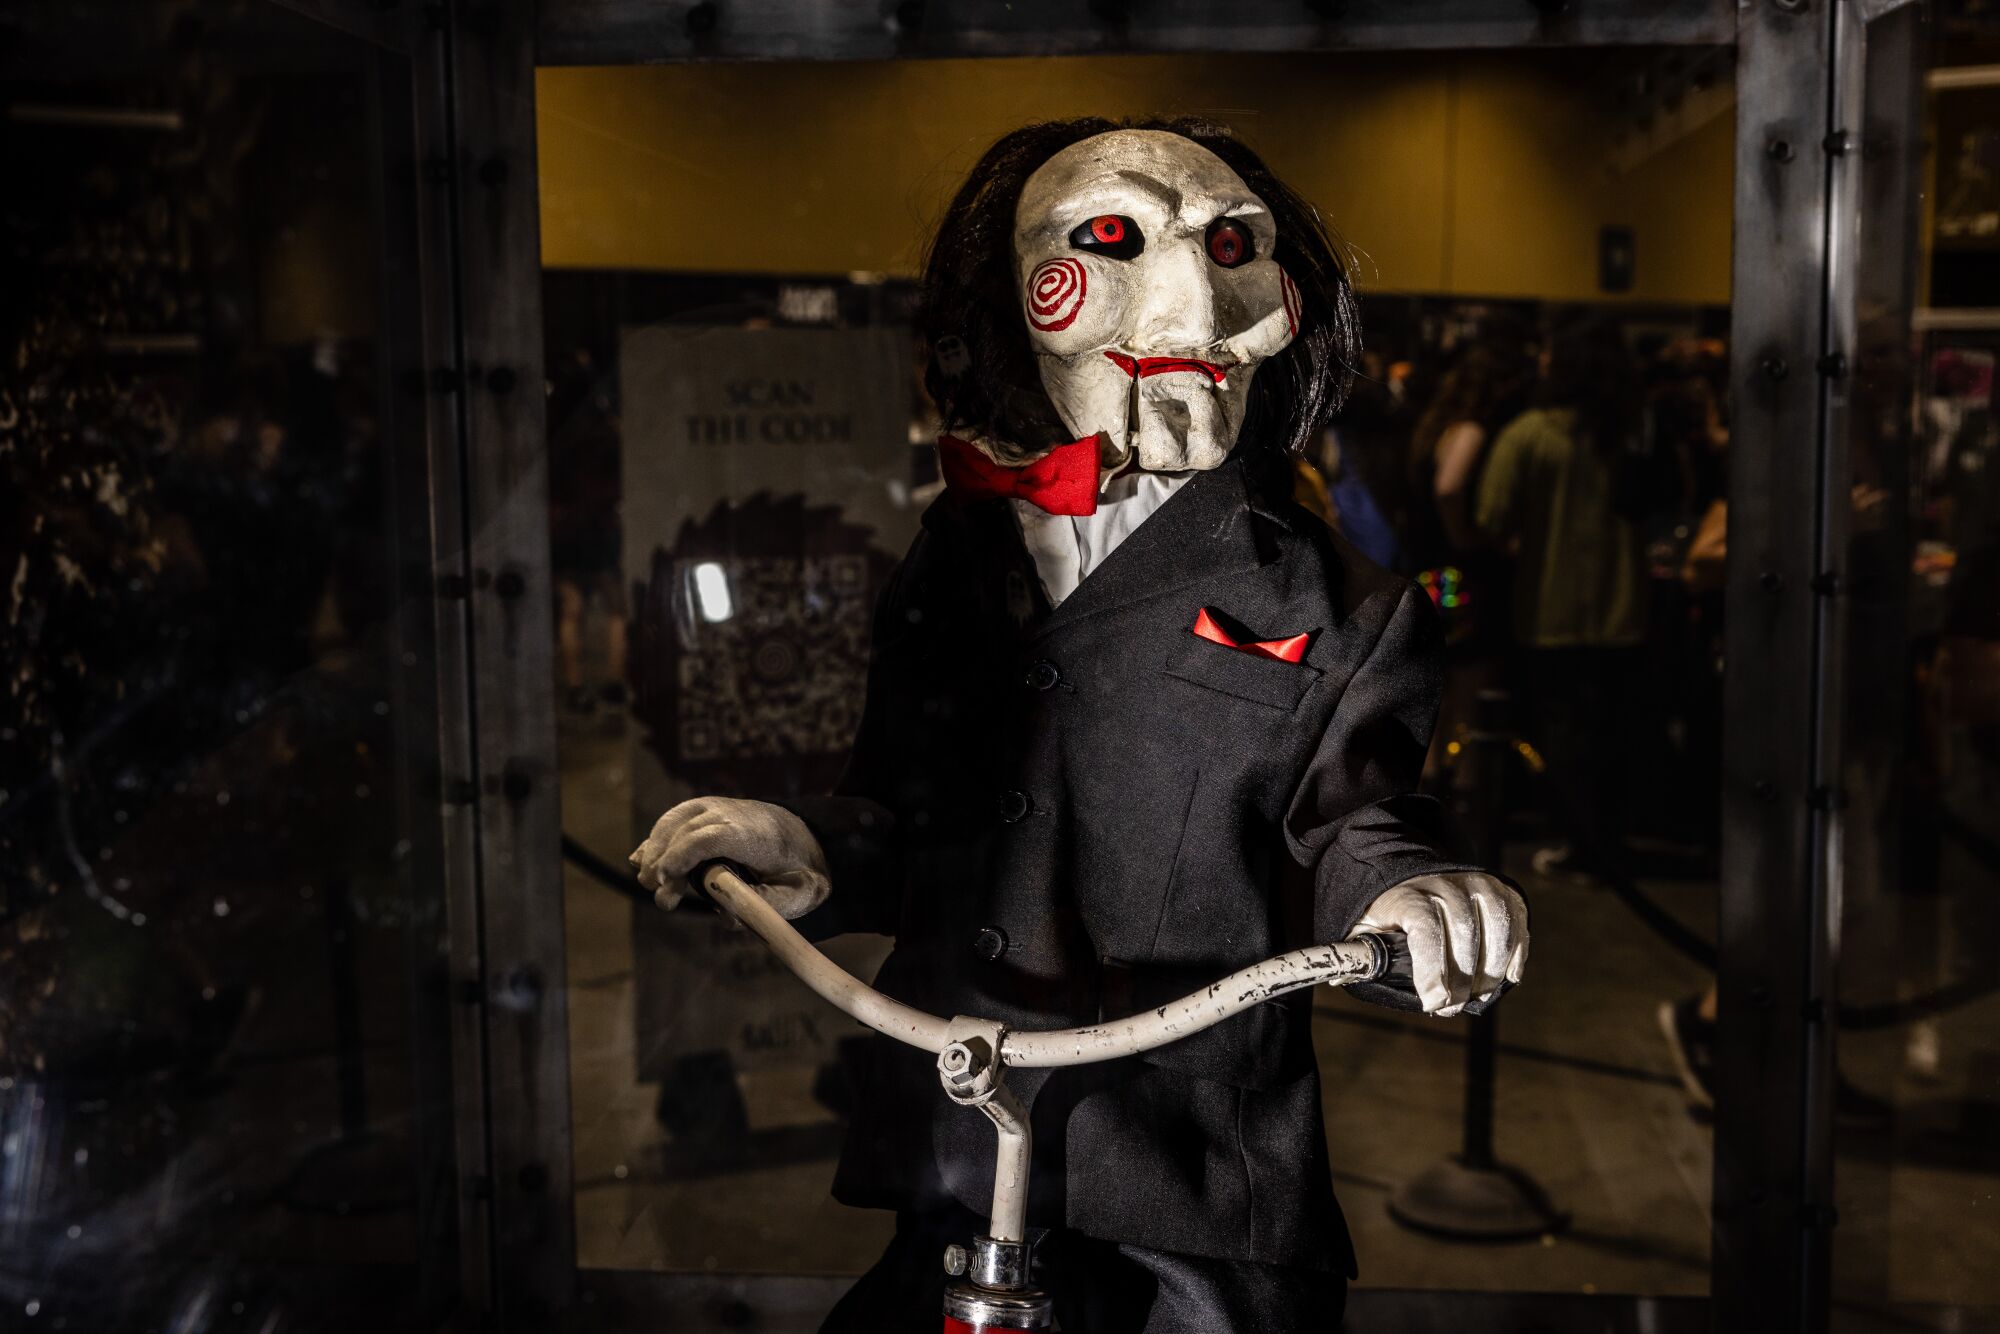 Billy the Puppet, from the "Saw" horror film franchise.